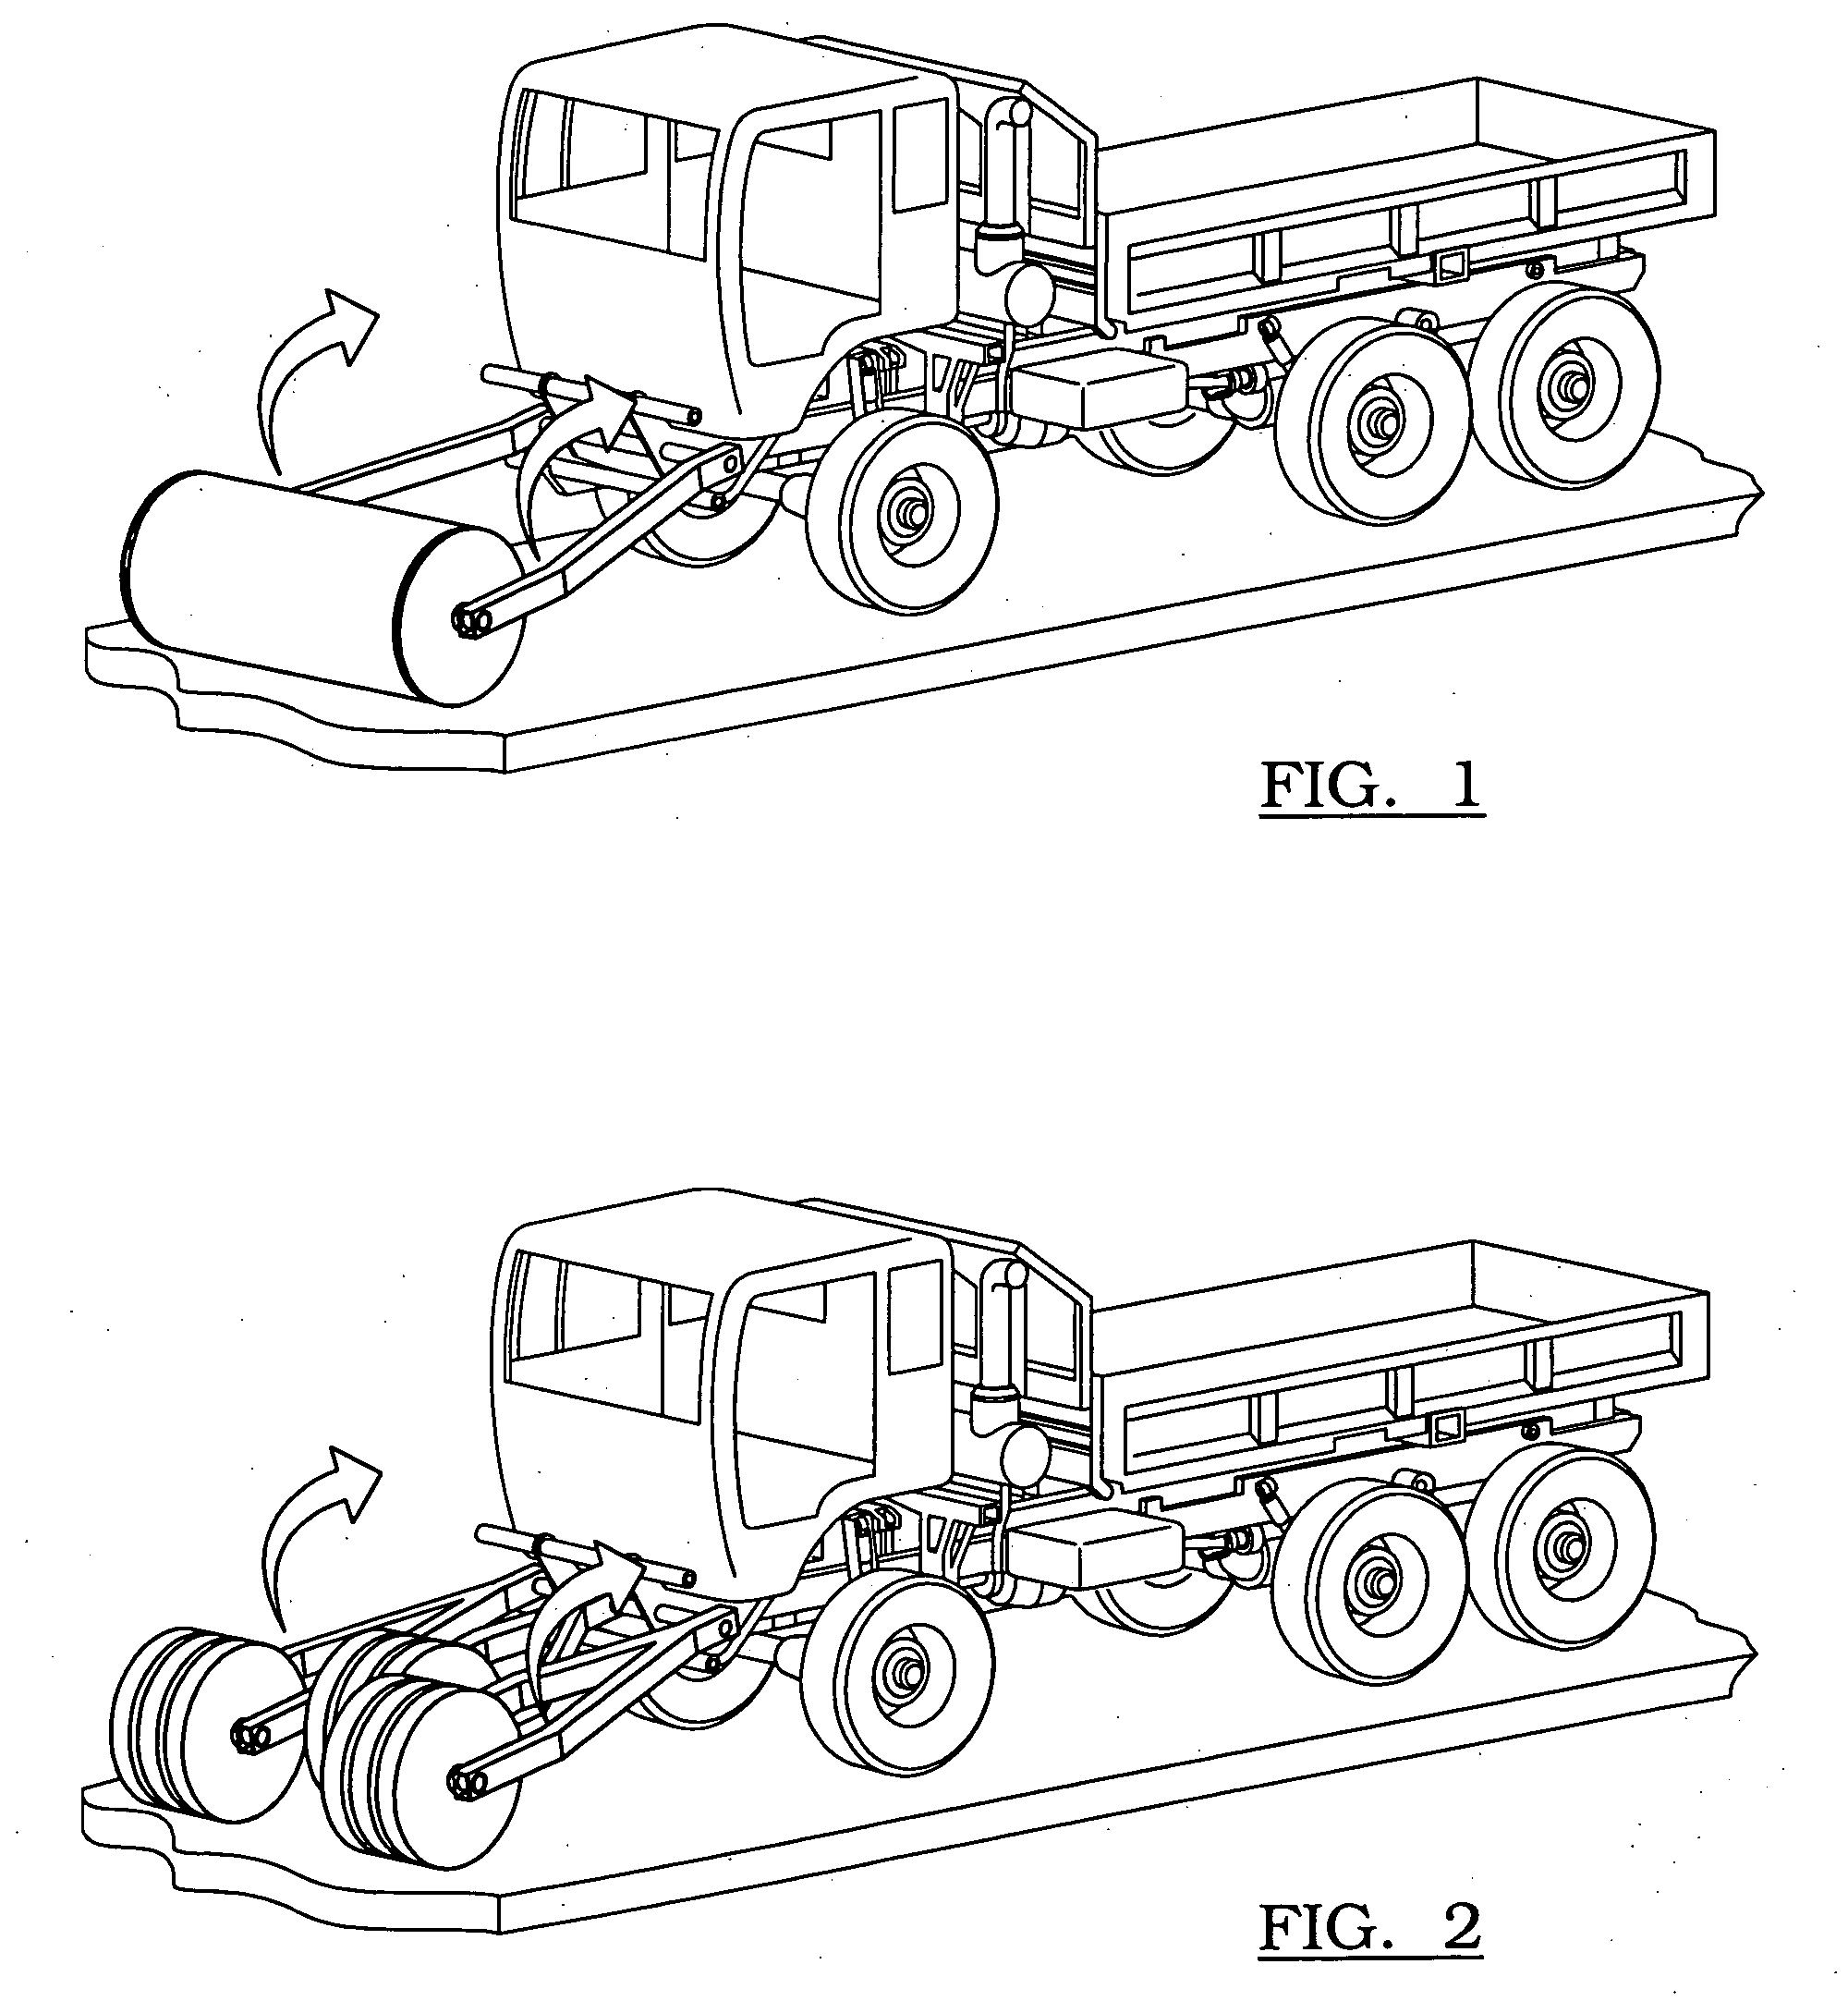 Vibratory countermine system and method